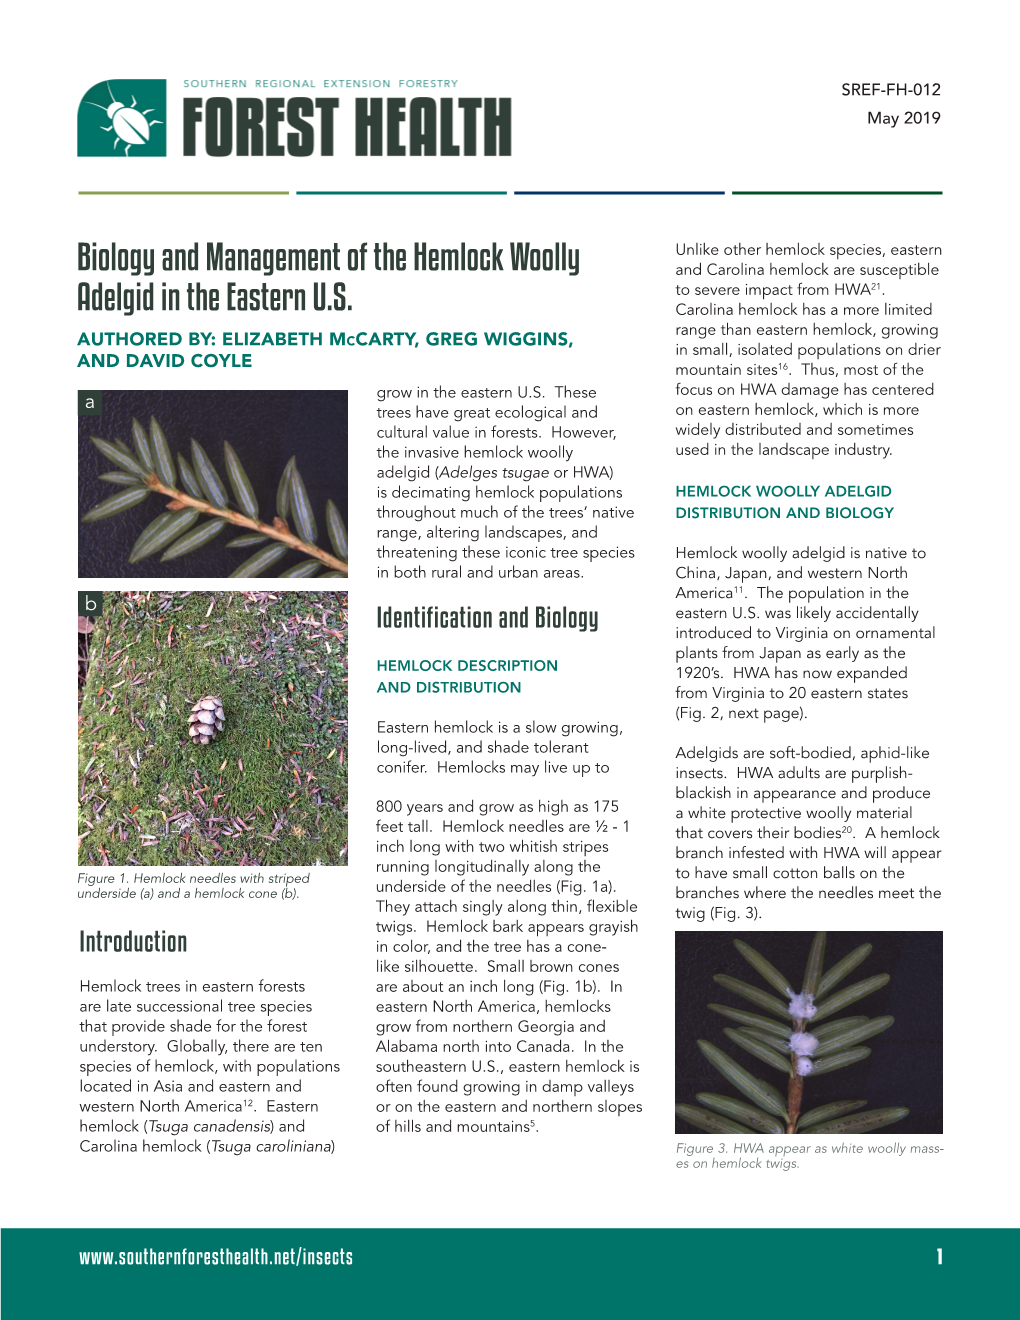 Biology and Management of the Hemlock Woolly Adelgid in The